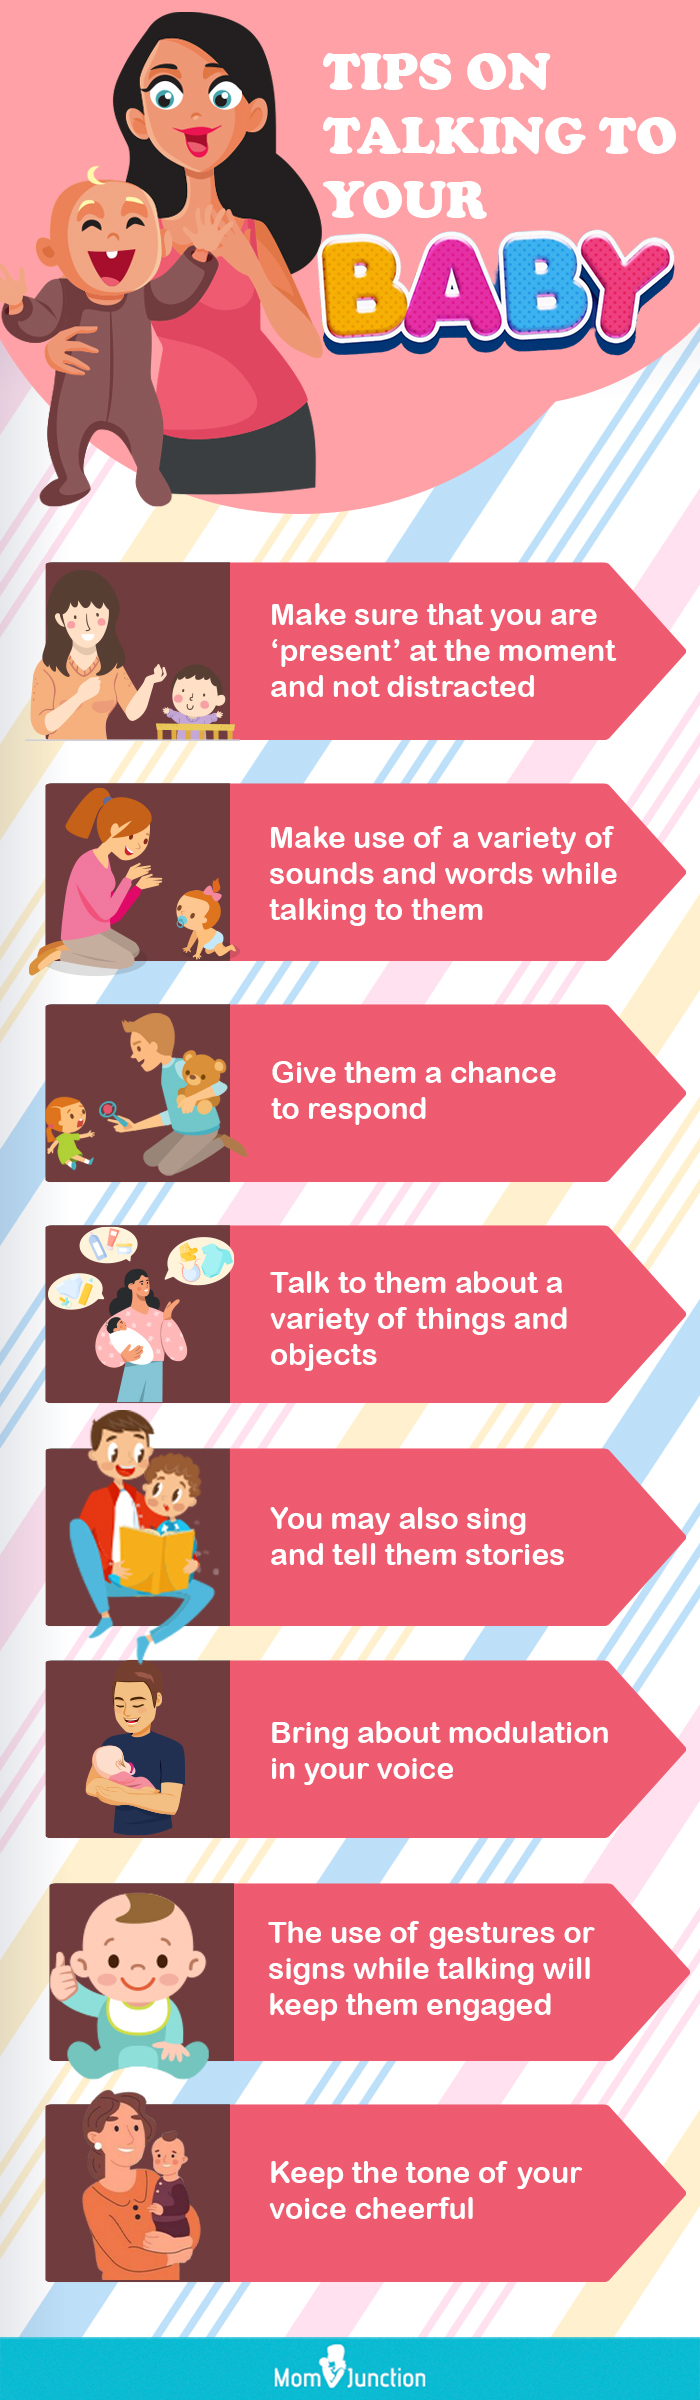 tips on talking to your baby [infographic]